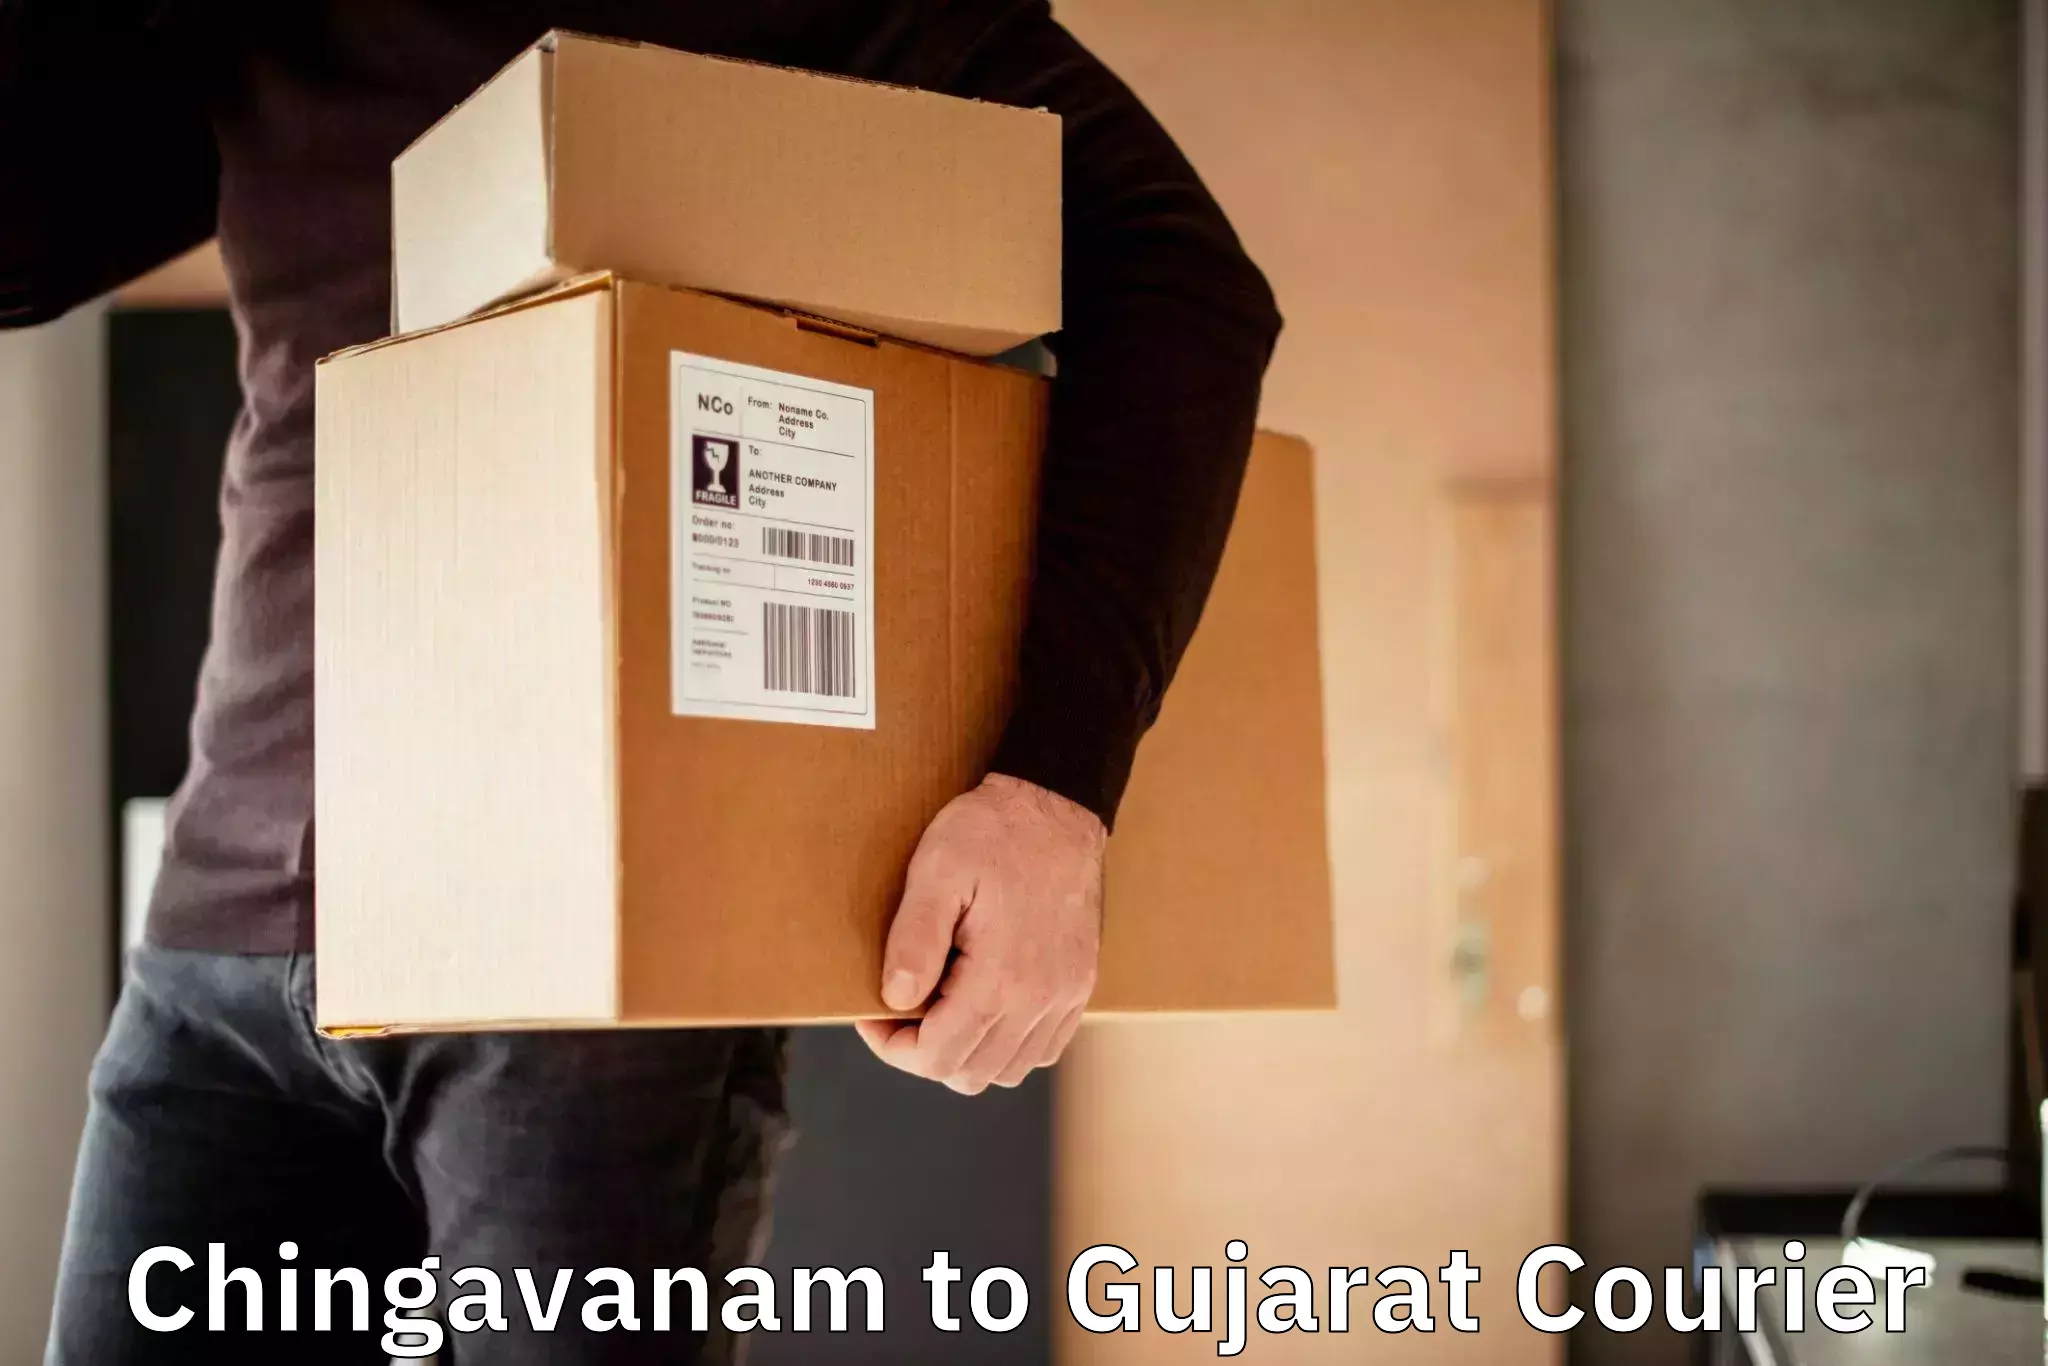 Courier service innovation Chingavanam to Ankleshwar